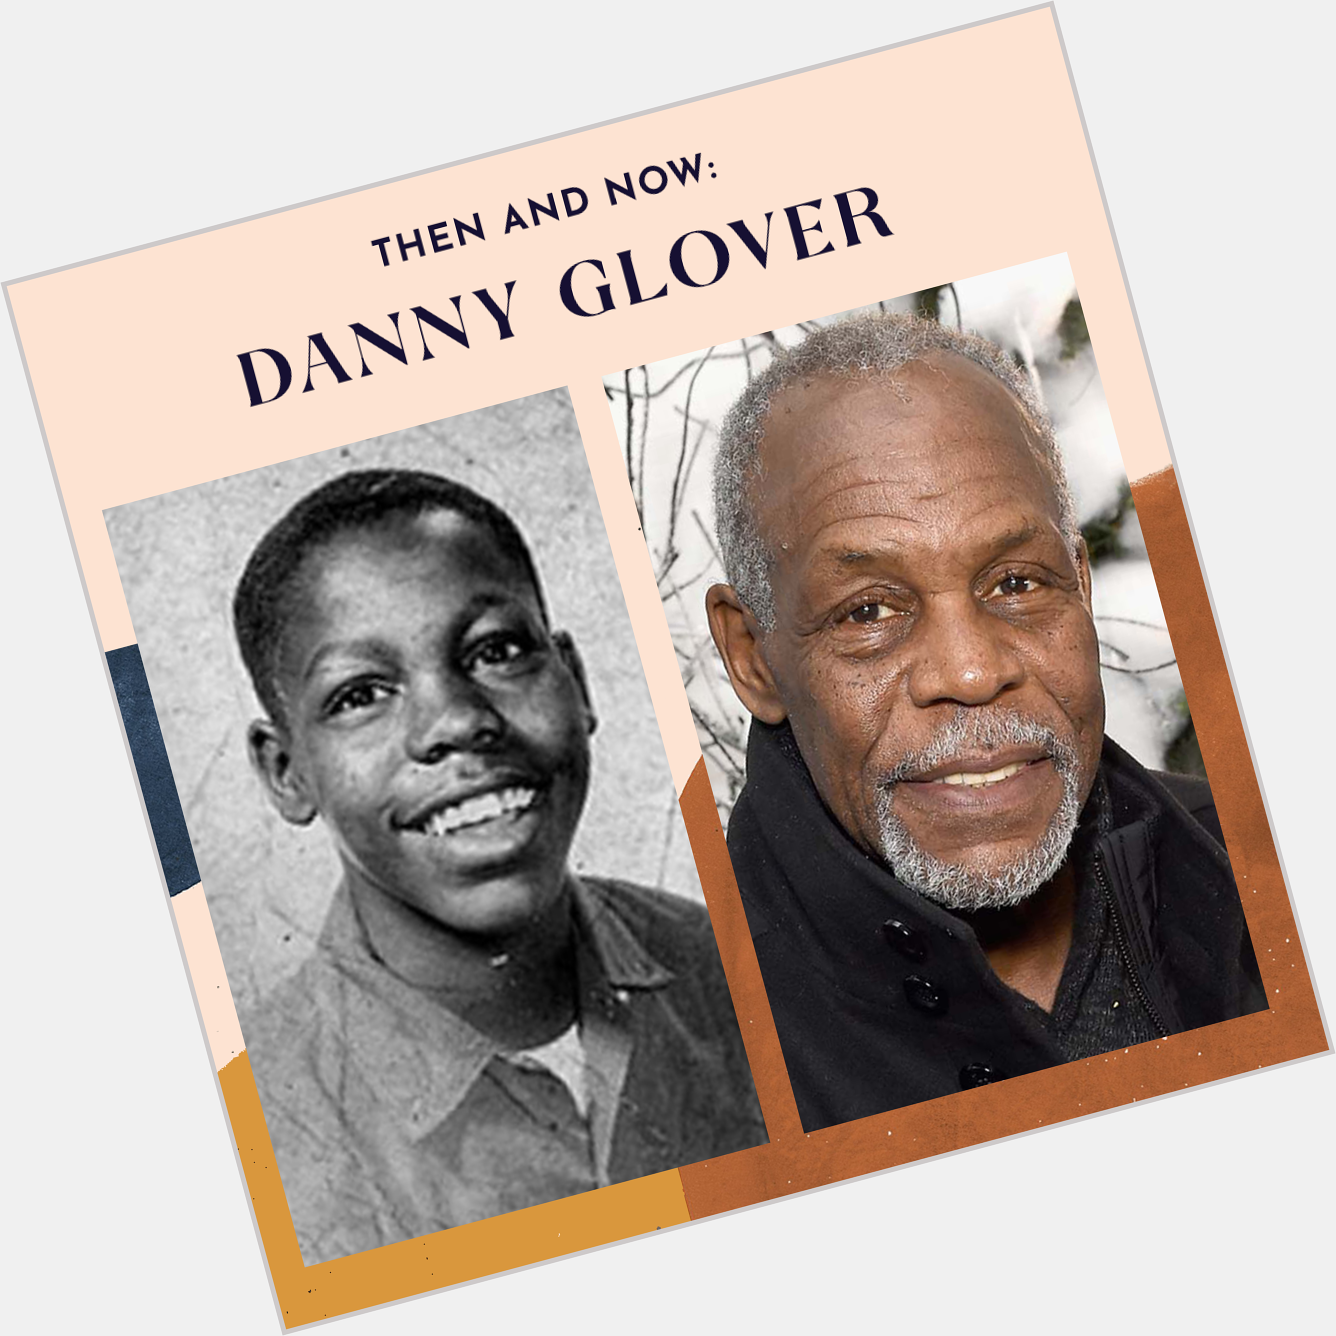 Happy Birthday, Danny Glover! The legendary actor turns 74 today! What\s your favorite role of his? 